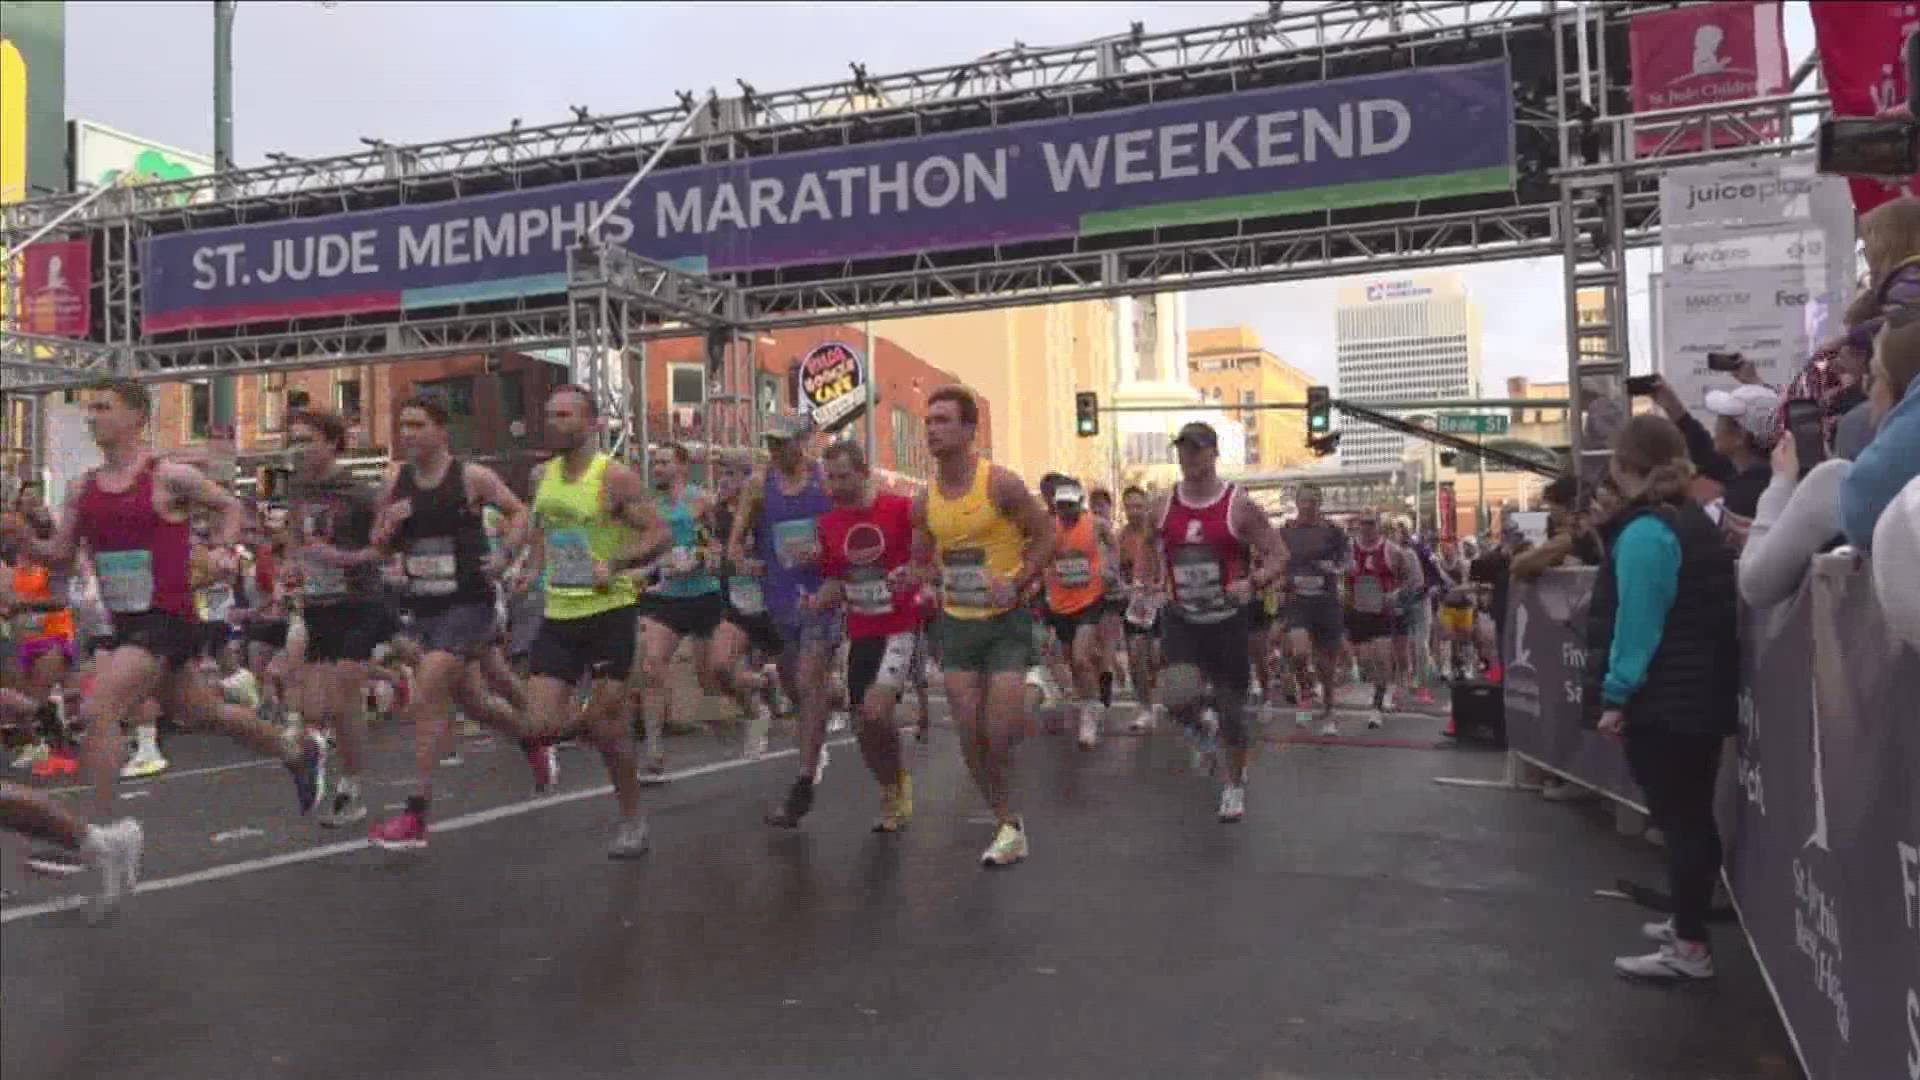 More than 20,000 runners from across the globe laced up for a good cause on Saturday. This annual 5K is one of the largest fundraisers St. Jude hosts.